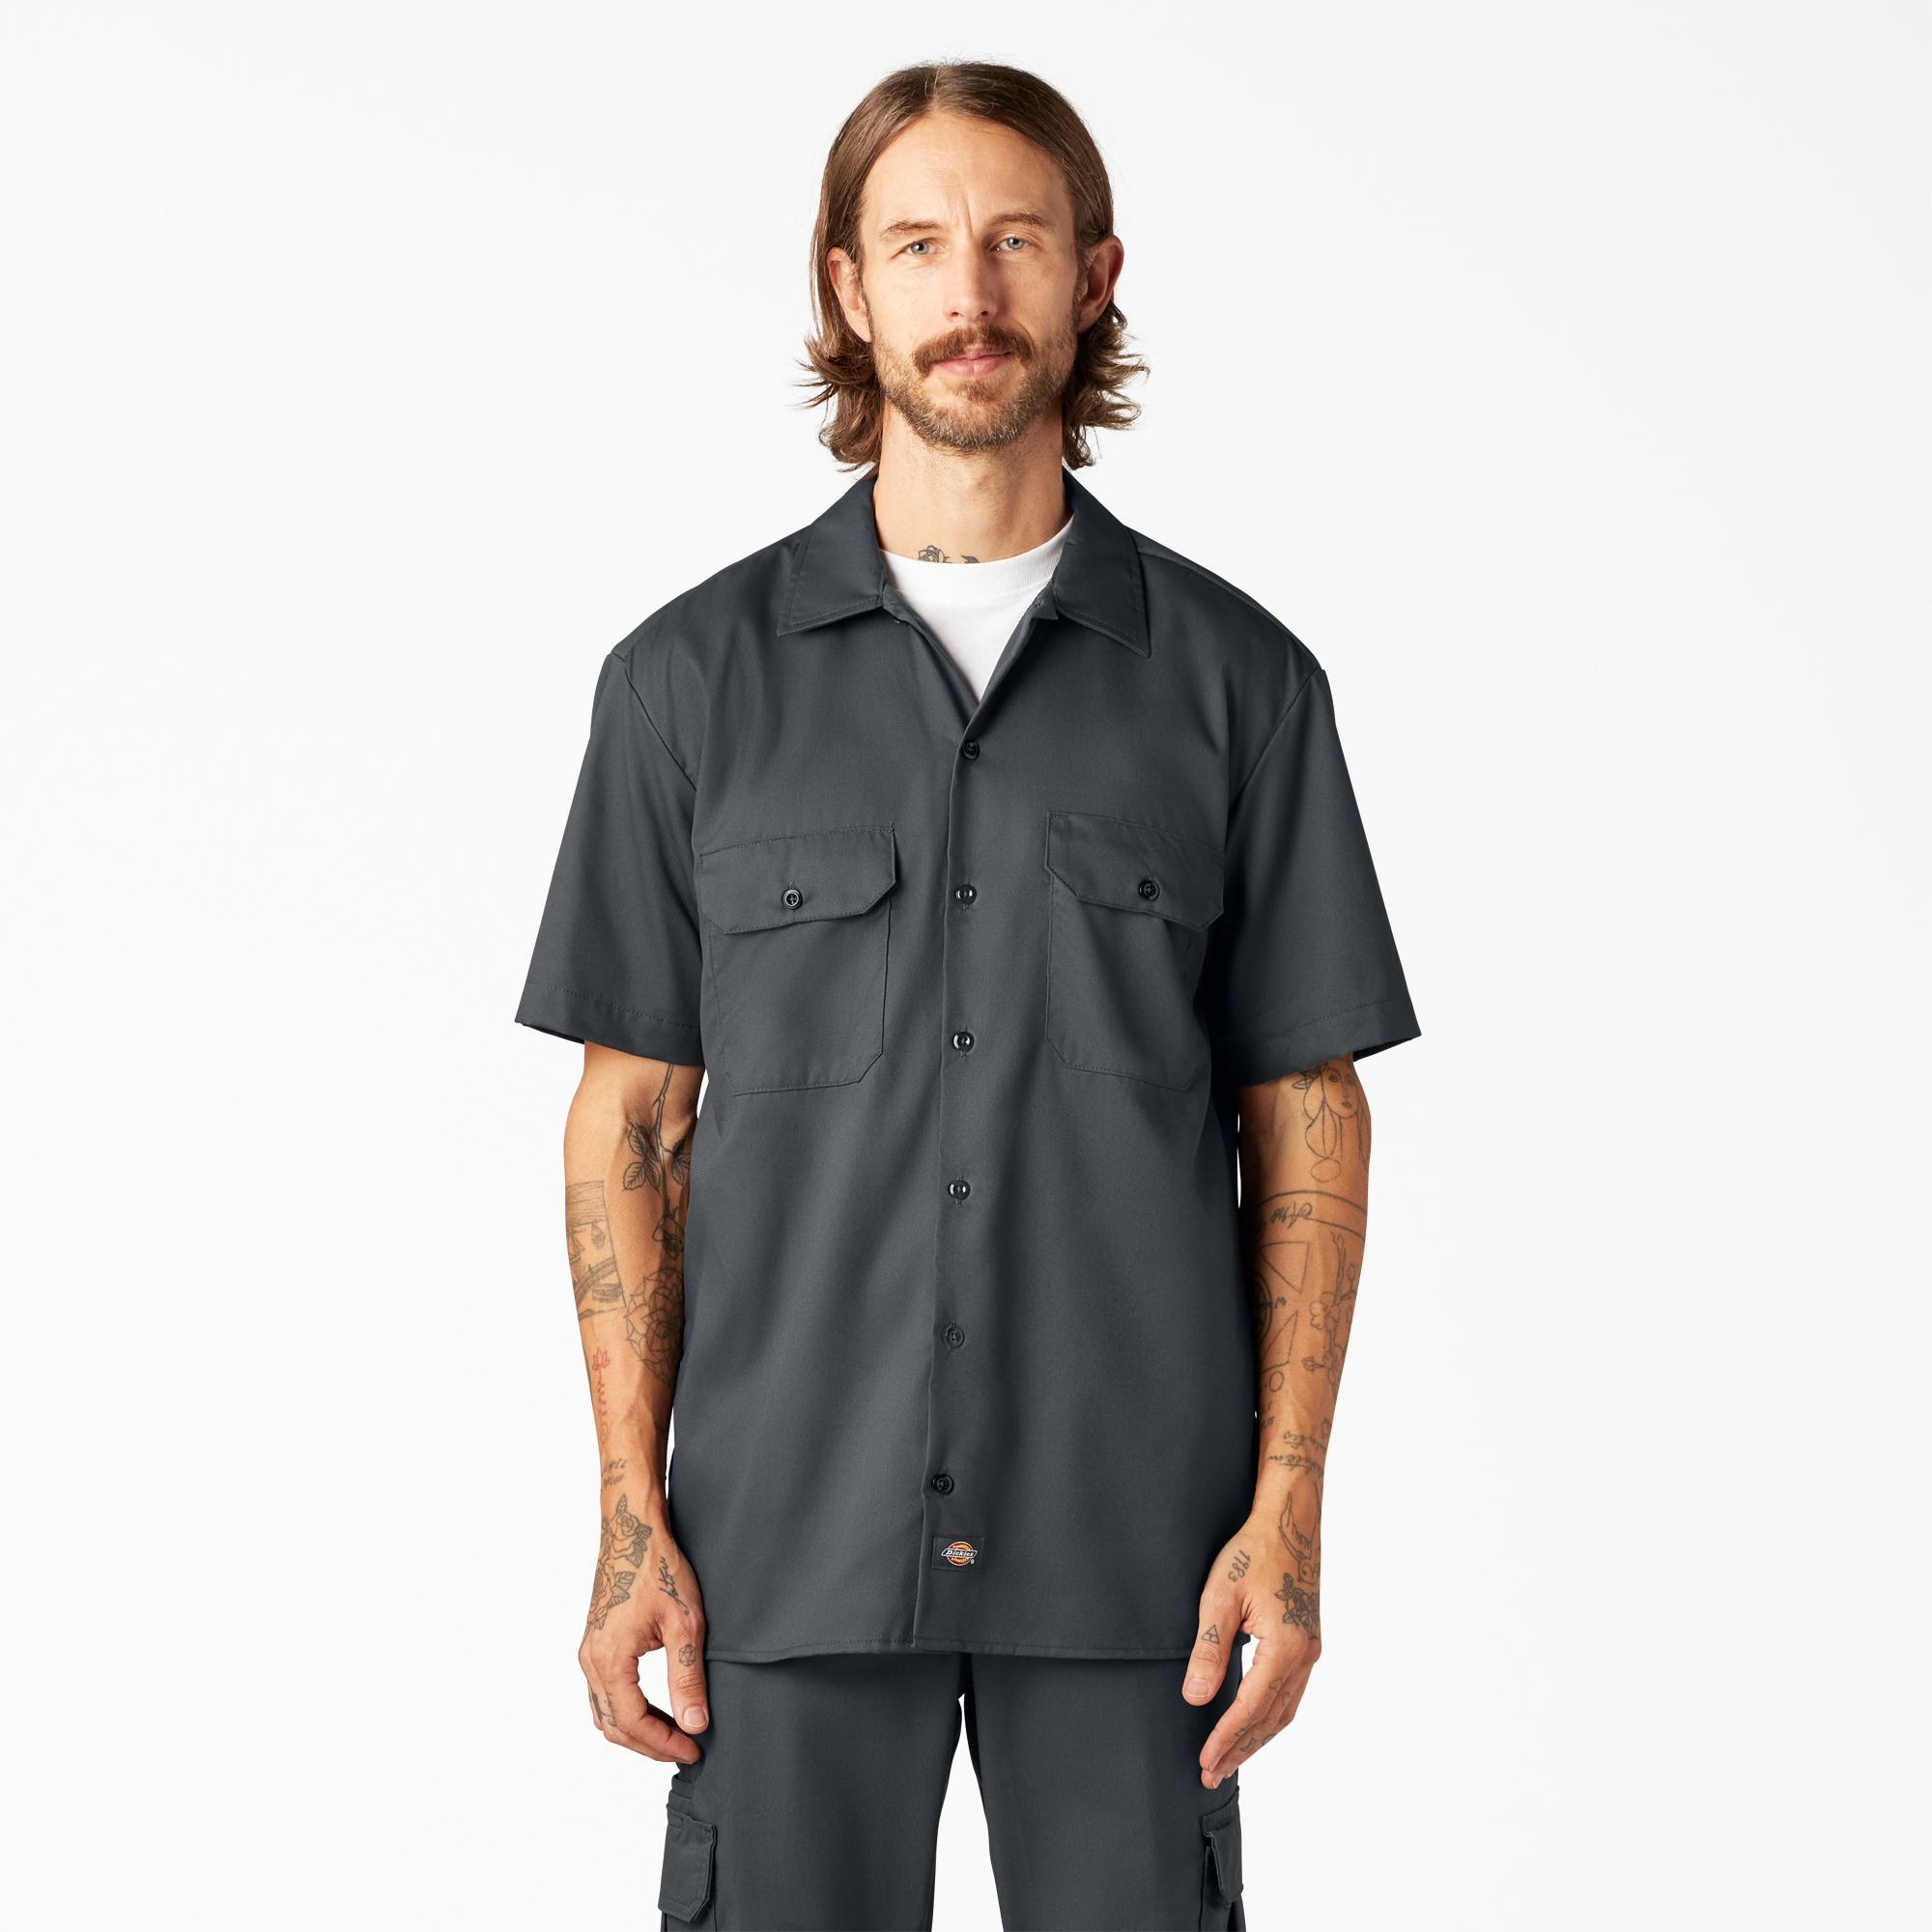 FLEX Relaxed Fit Short Sleeve Twill Work Shirt - Charcoal Gray (CH)